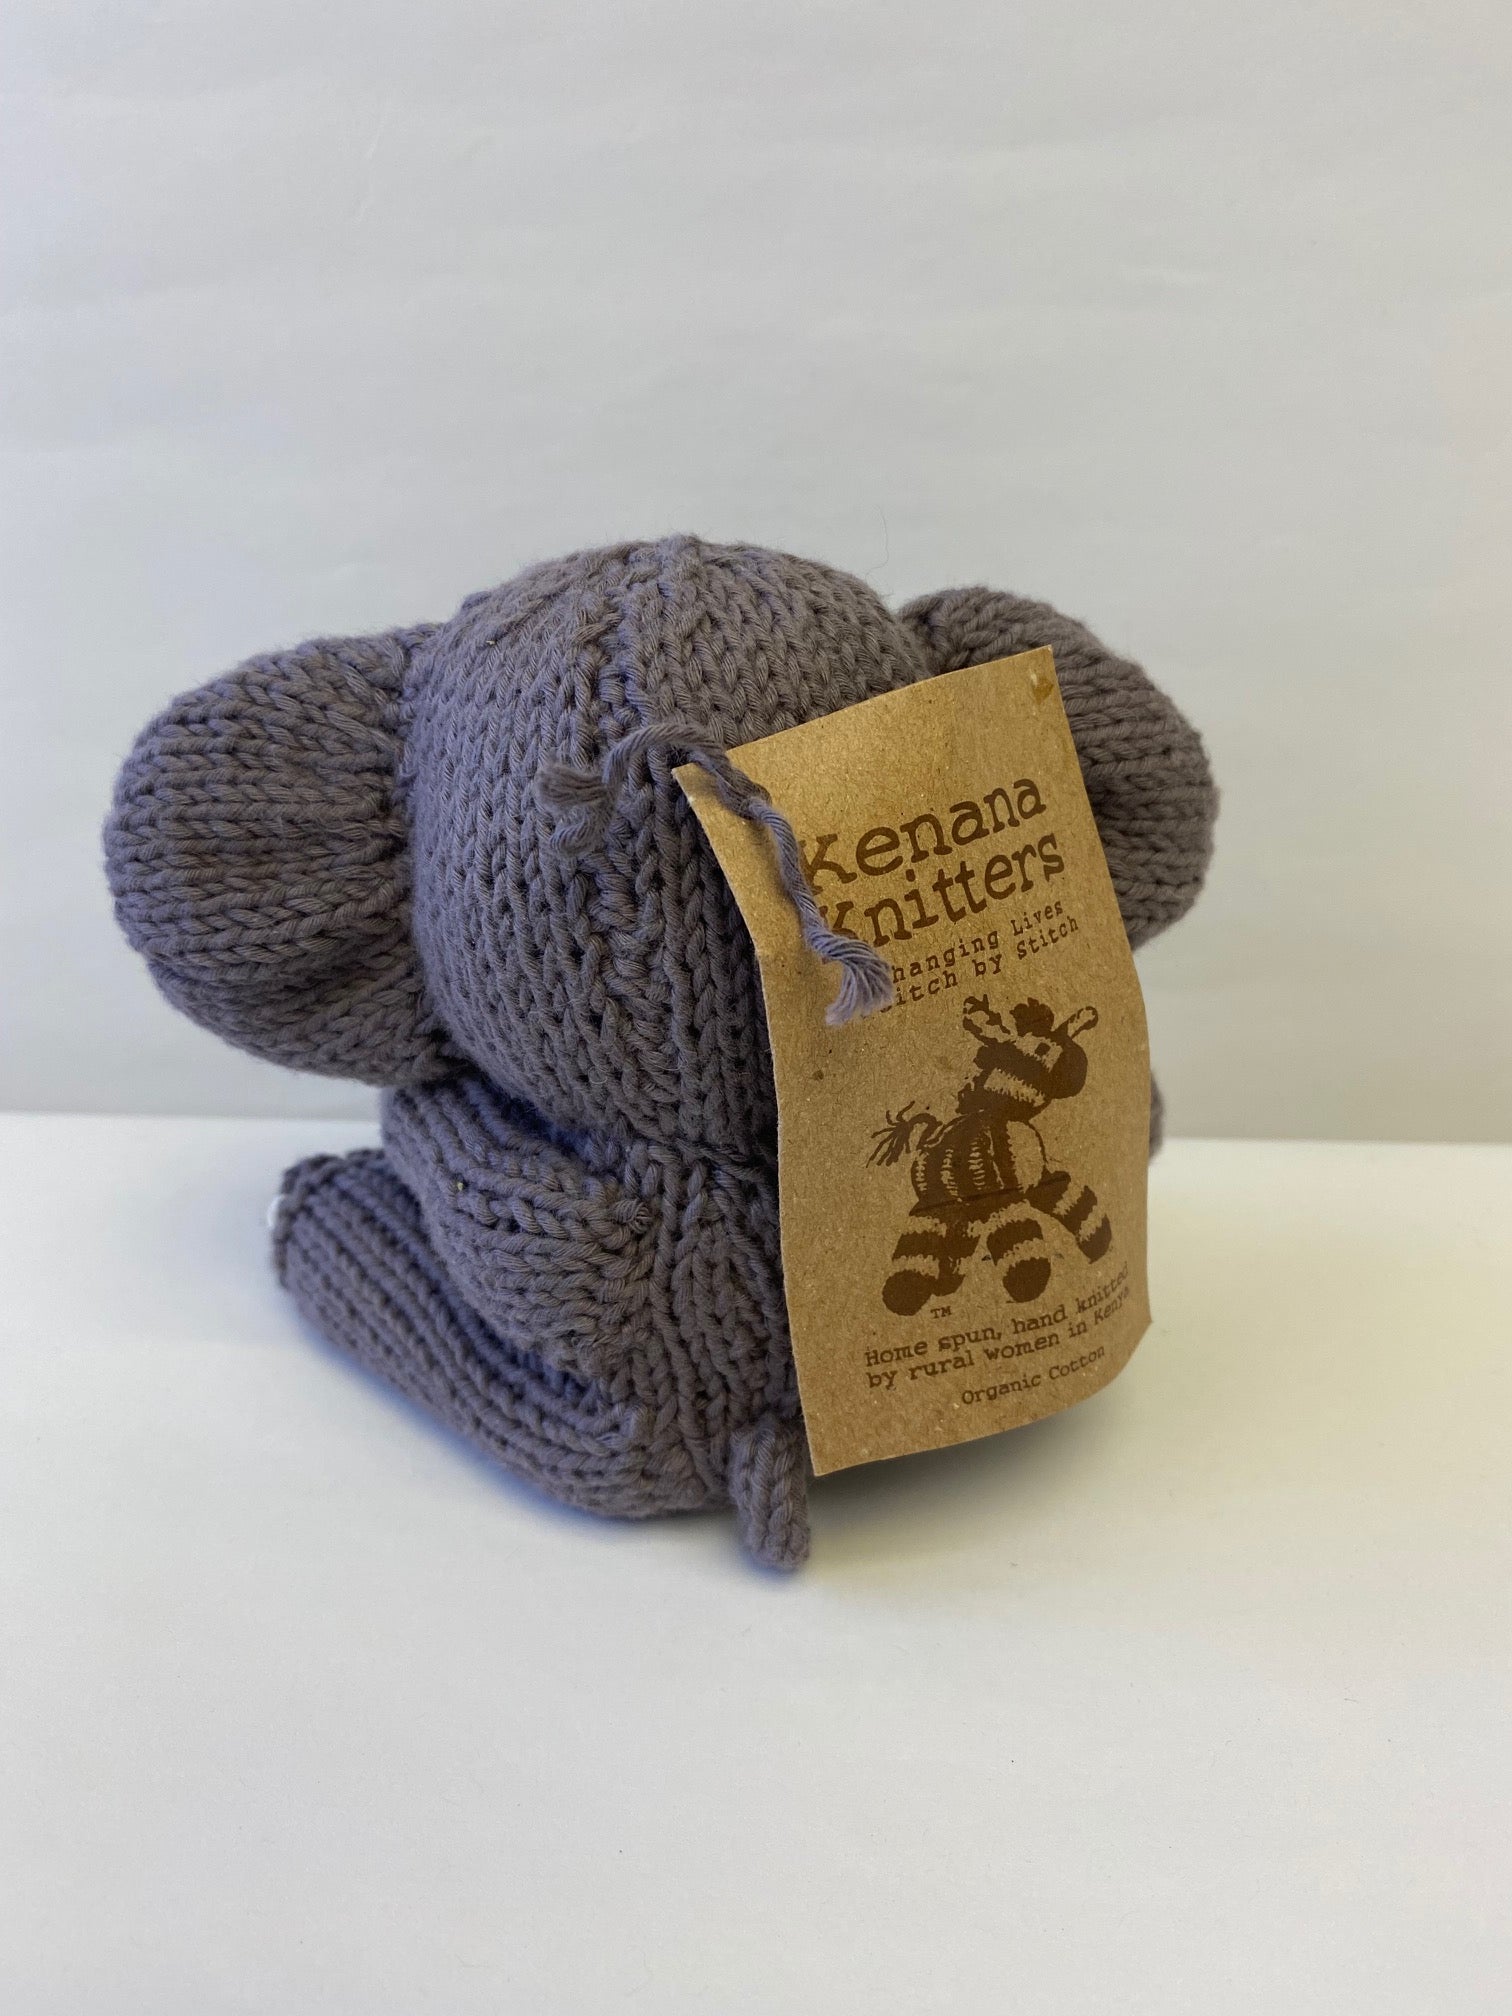 Hand Knitted Elephant- Small